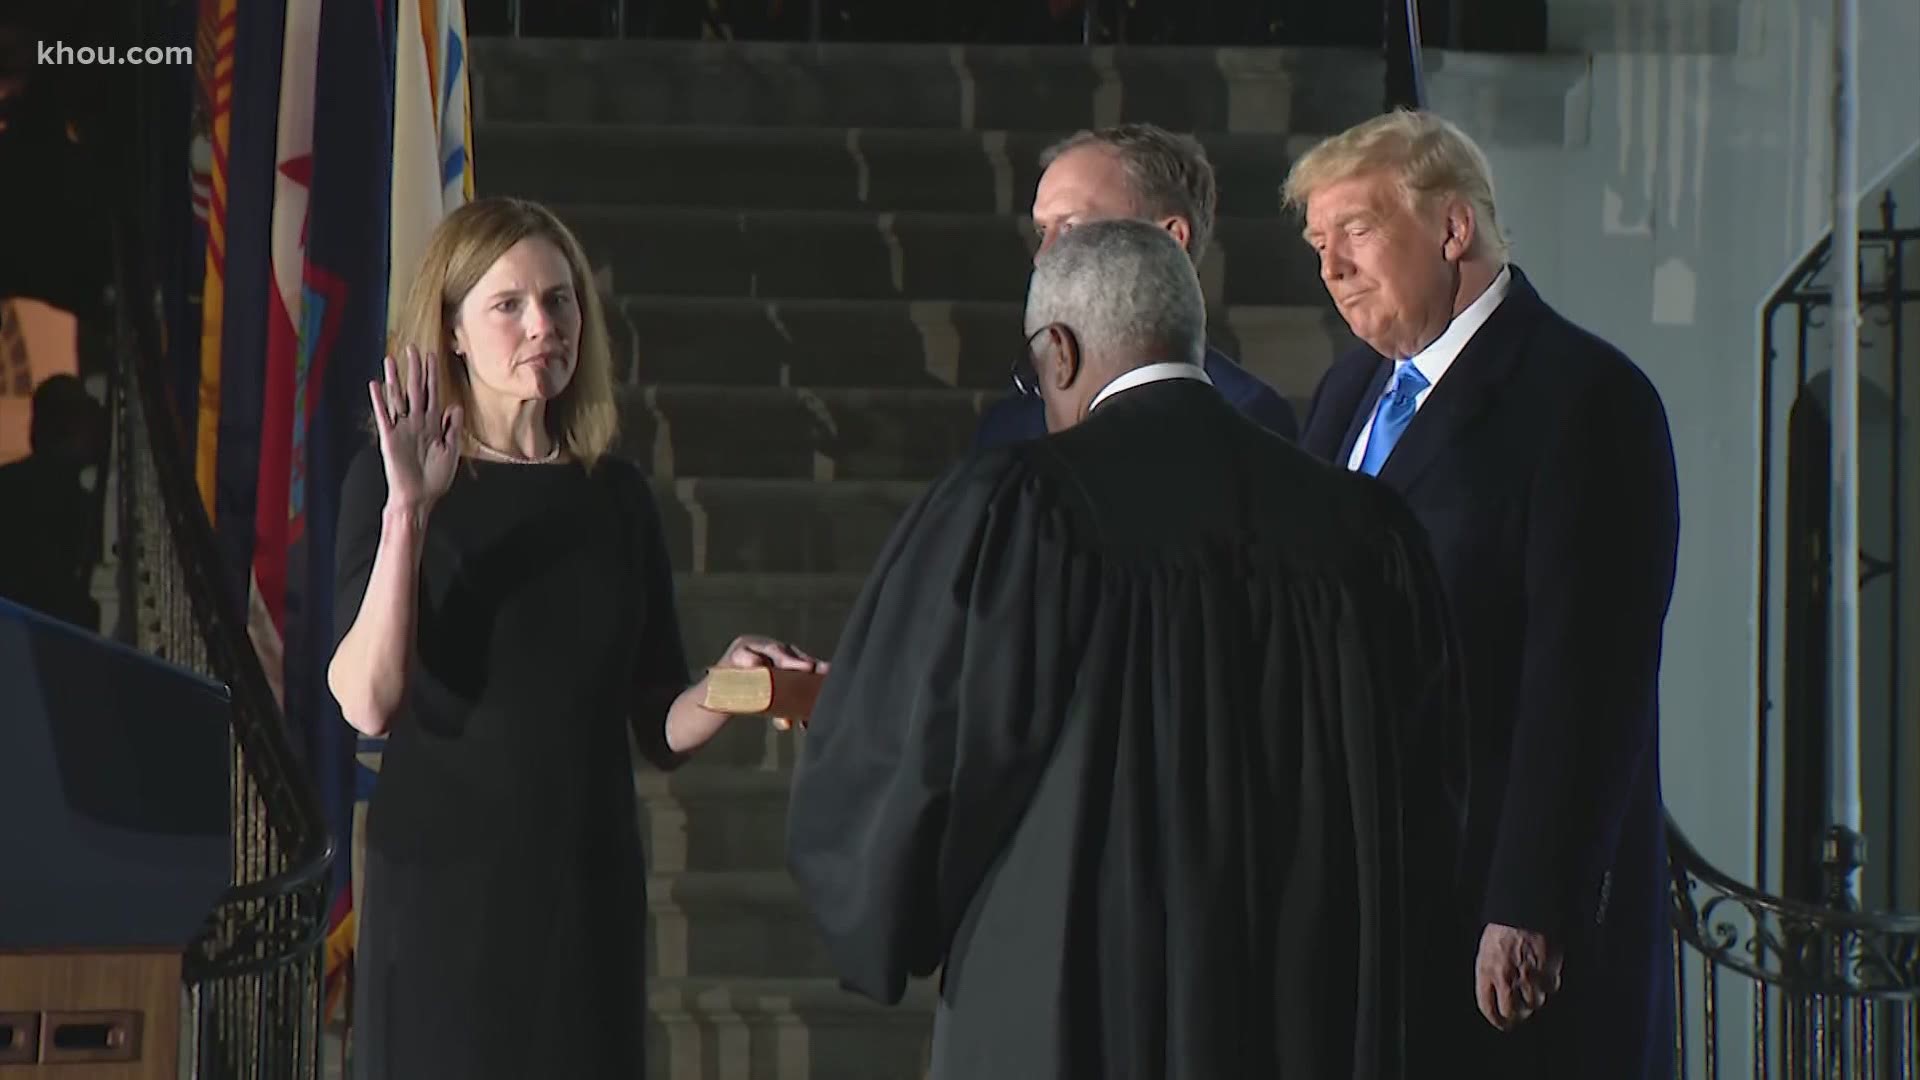 Barrett will be the third Supreme Court justice nominated by President Donald Trump.